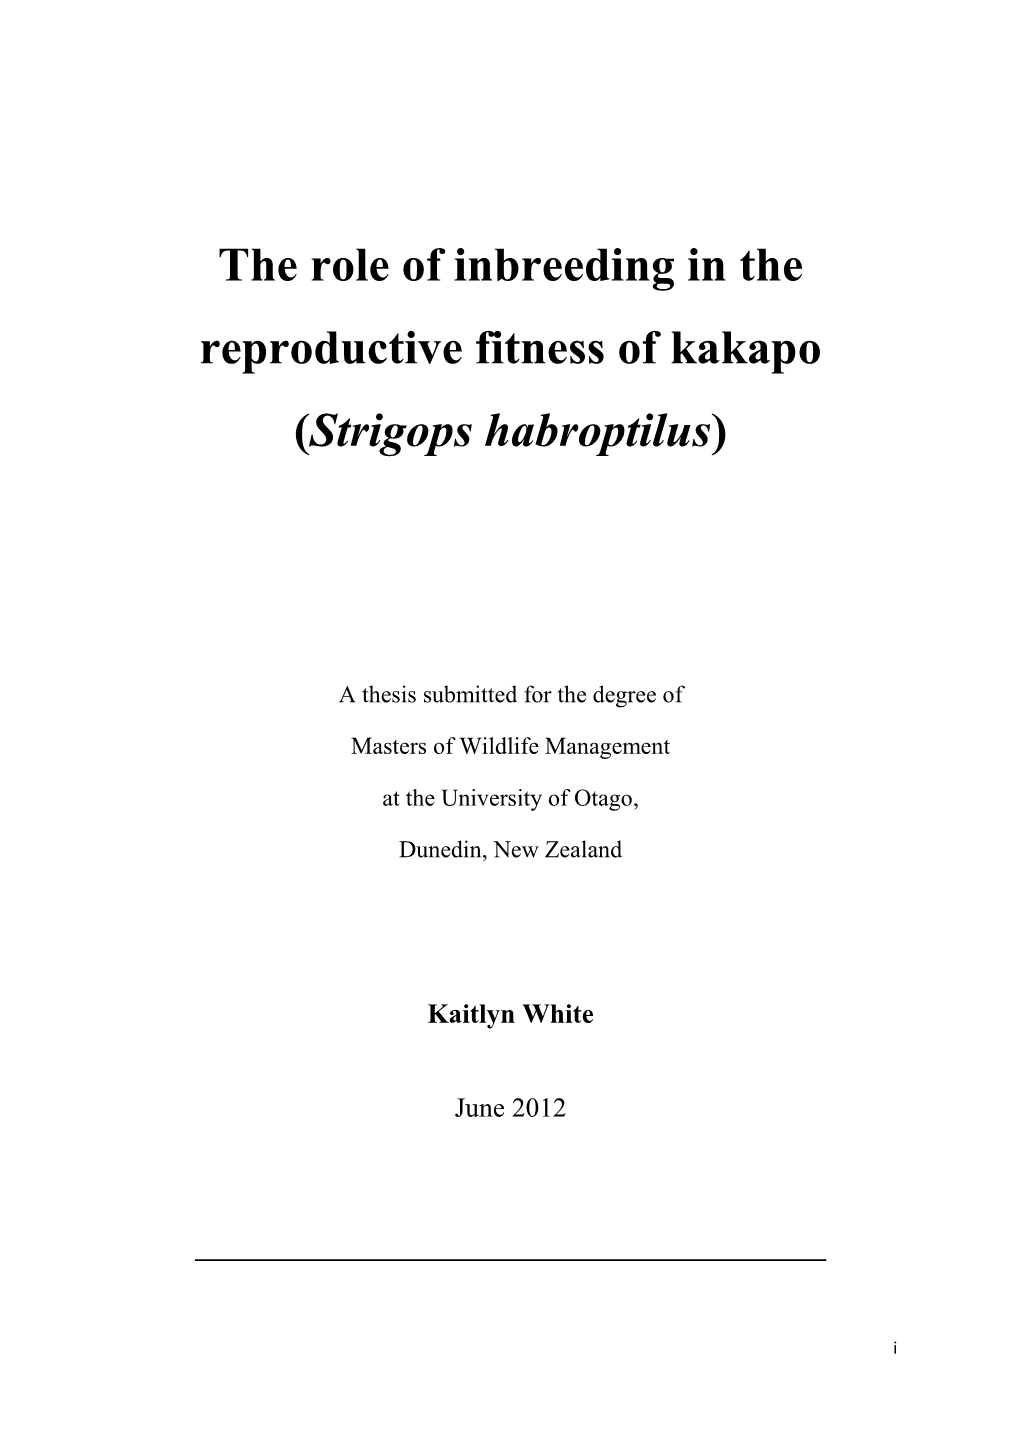 The Role of Inbreeding in the Reproductive Fitness of Kakapo (Strigops Habroptilus)